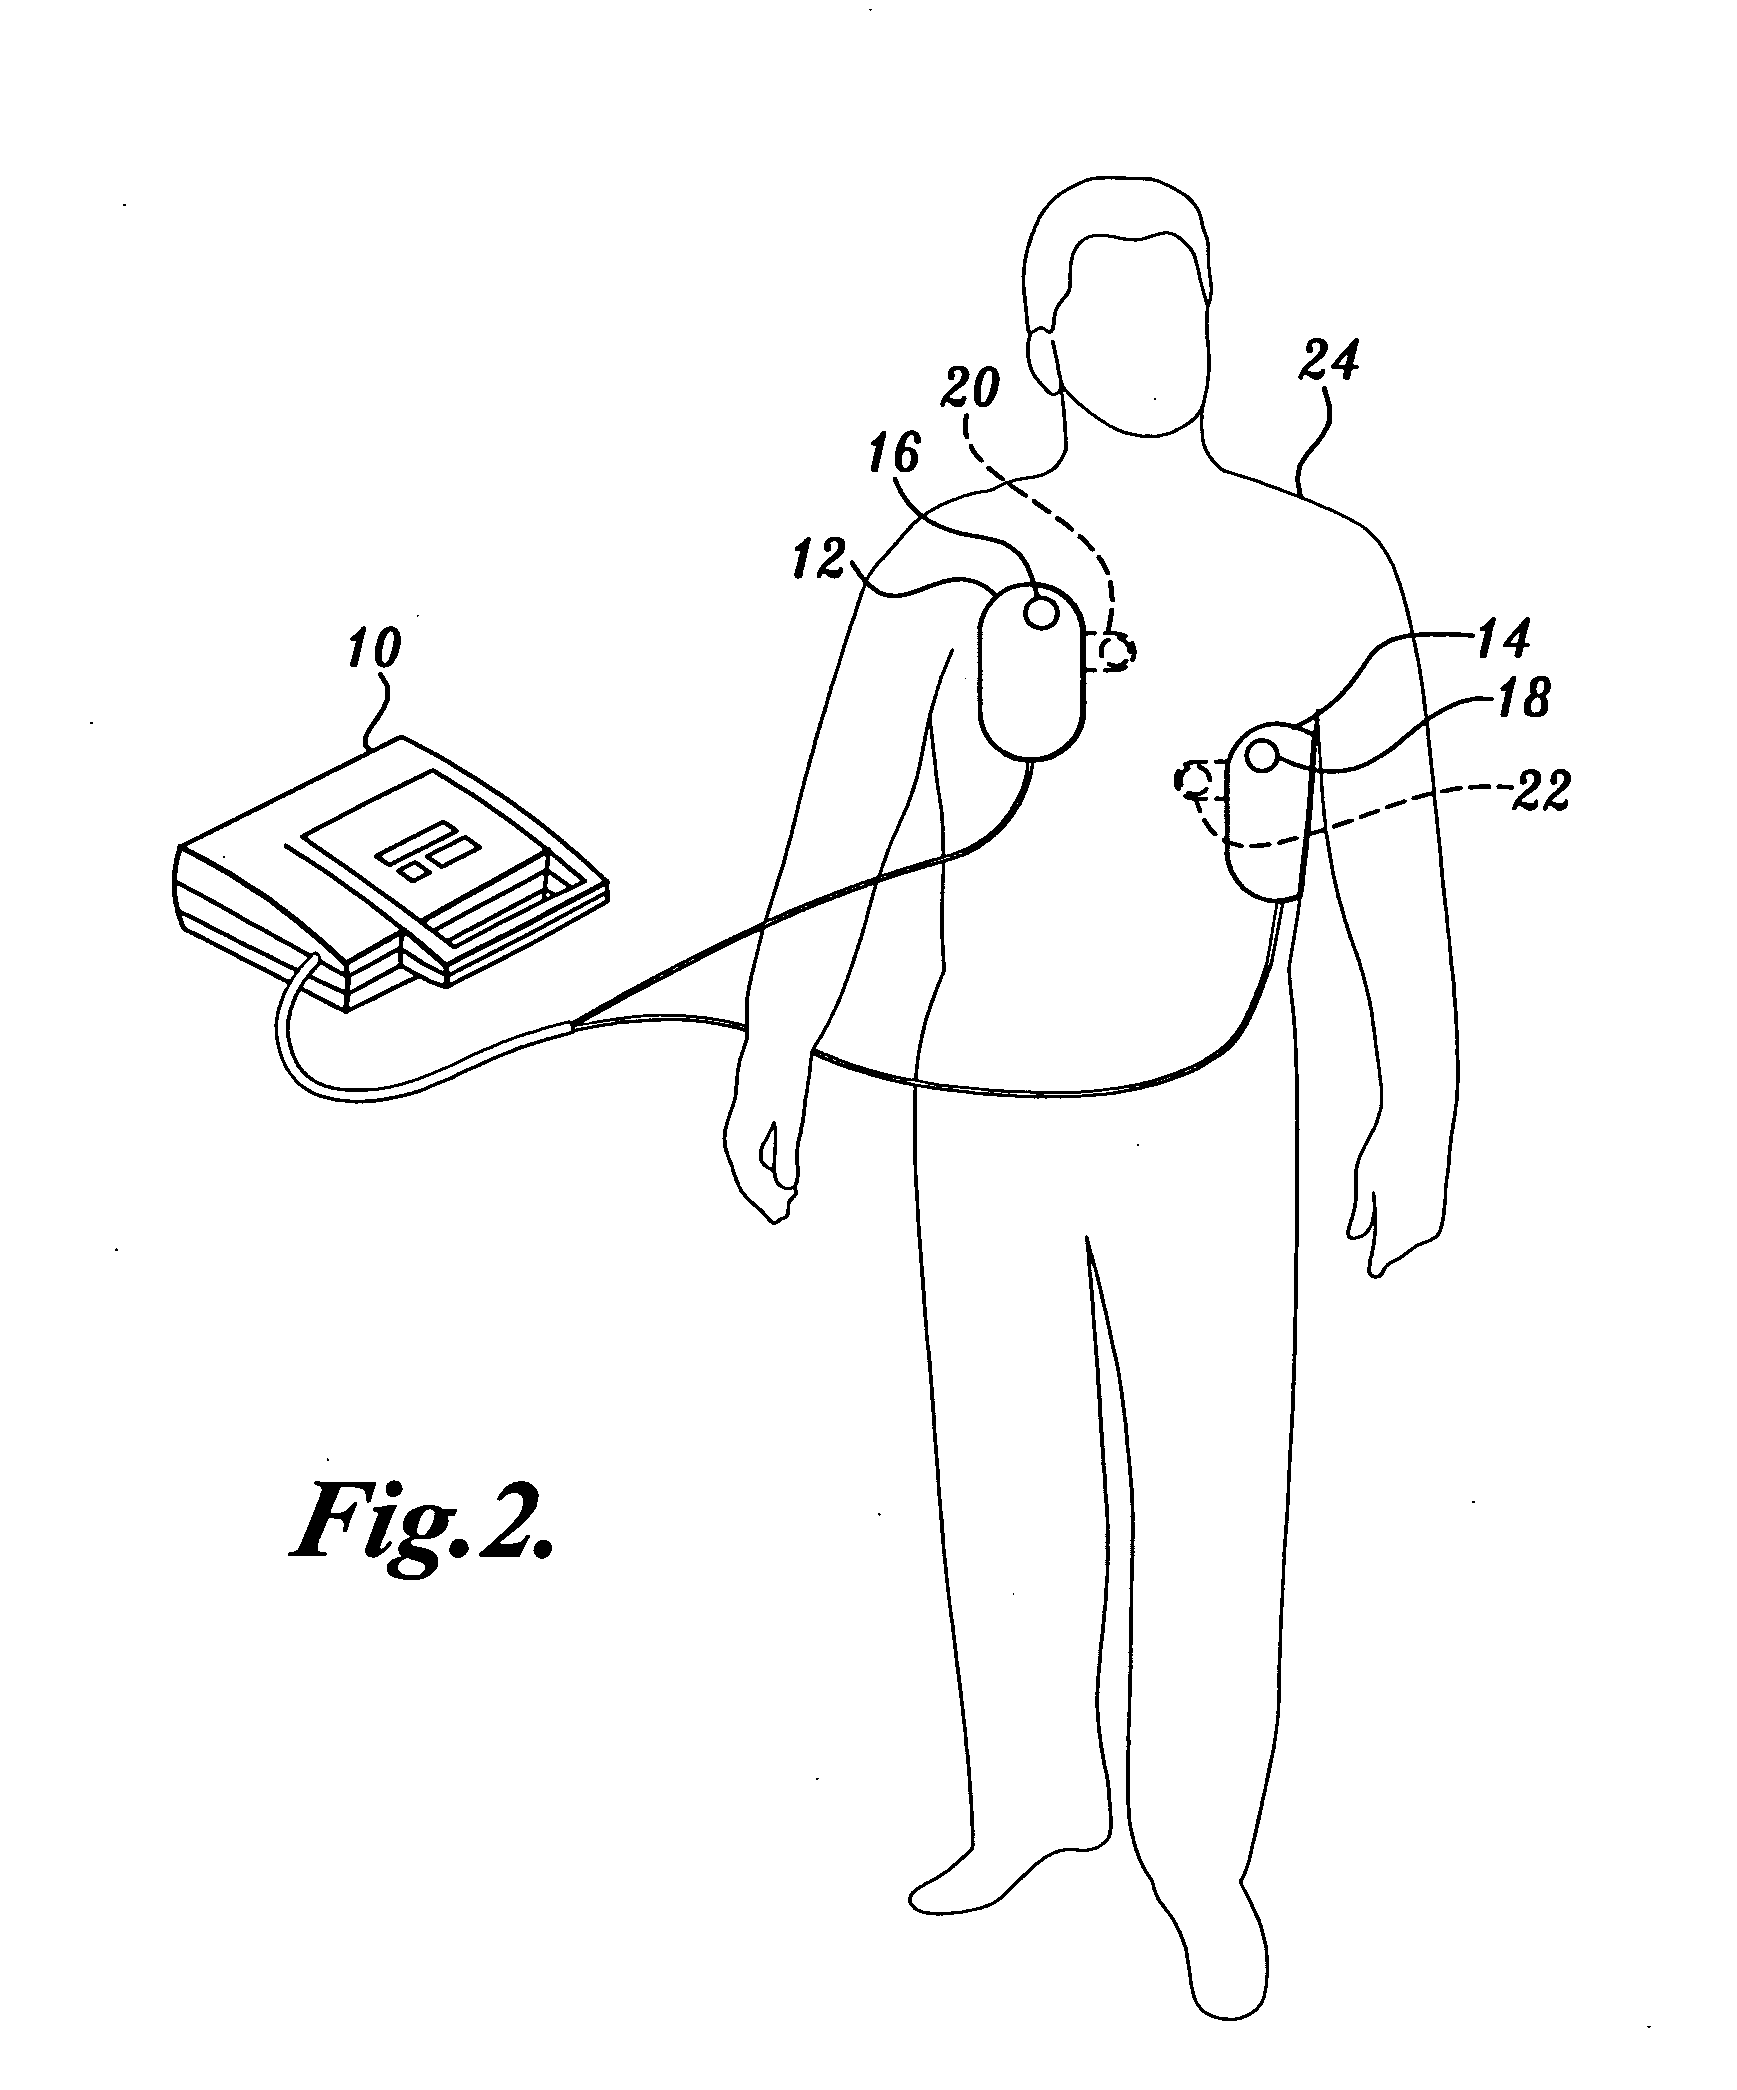 Pulse detection apparatus, software, and methods using patient physiological signals